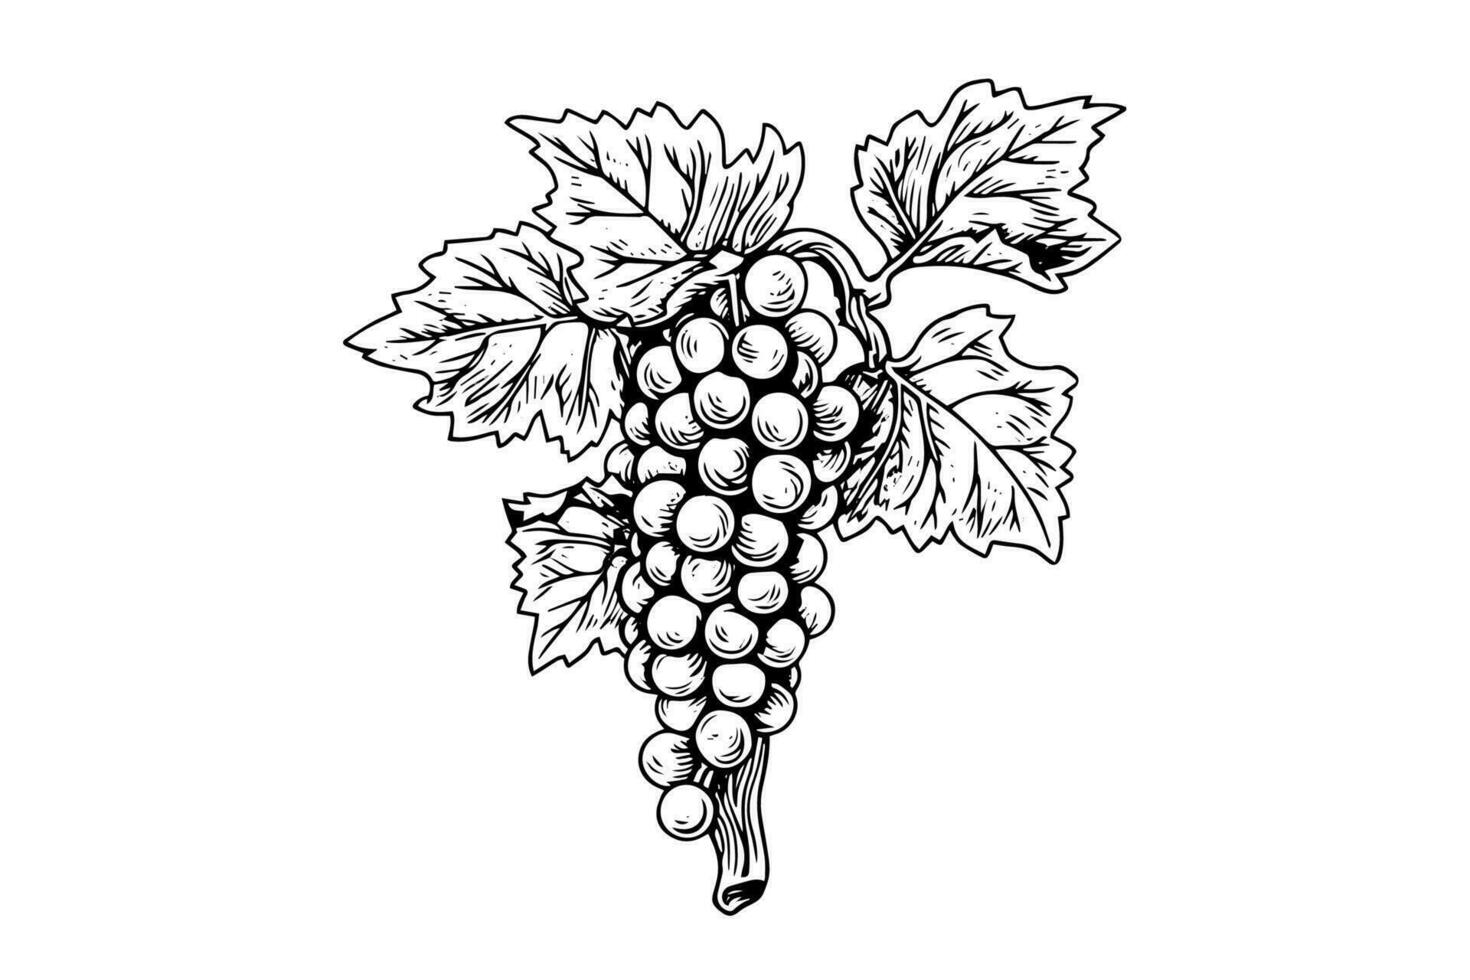 Hand drawn ink sketch of grape on the branch. Engraving style vector illustration.